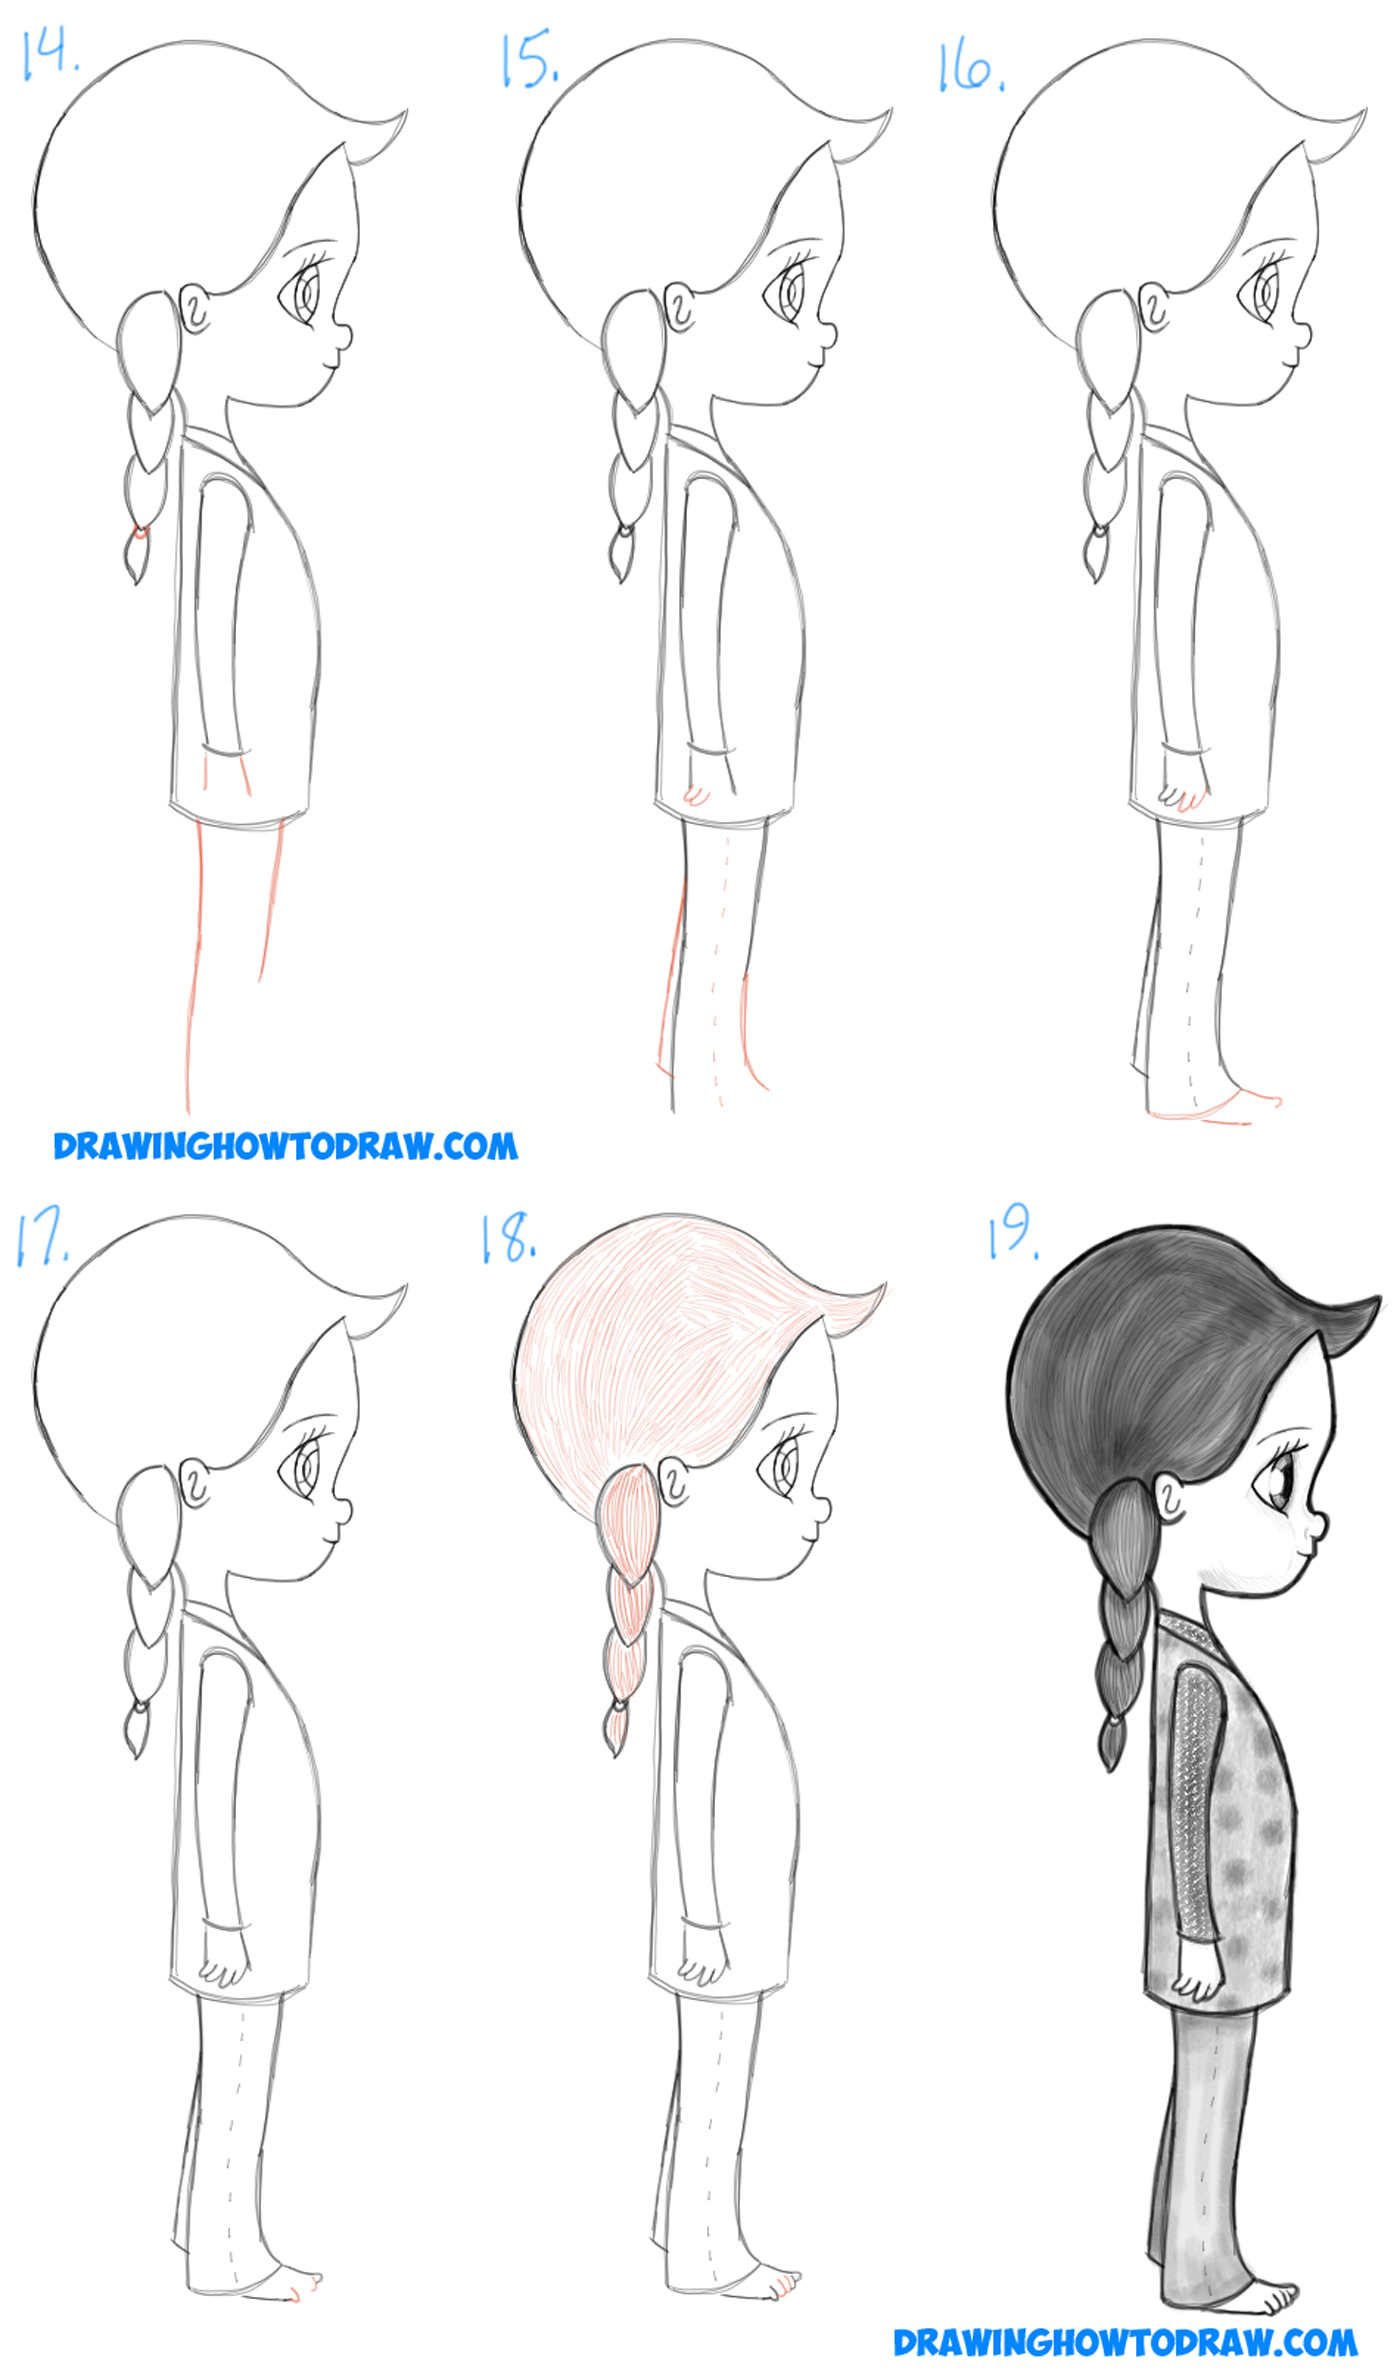 How to Draw a Cute Chibi / Manga / Anime Girl from the Side View Easy